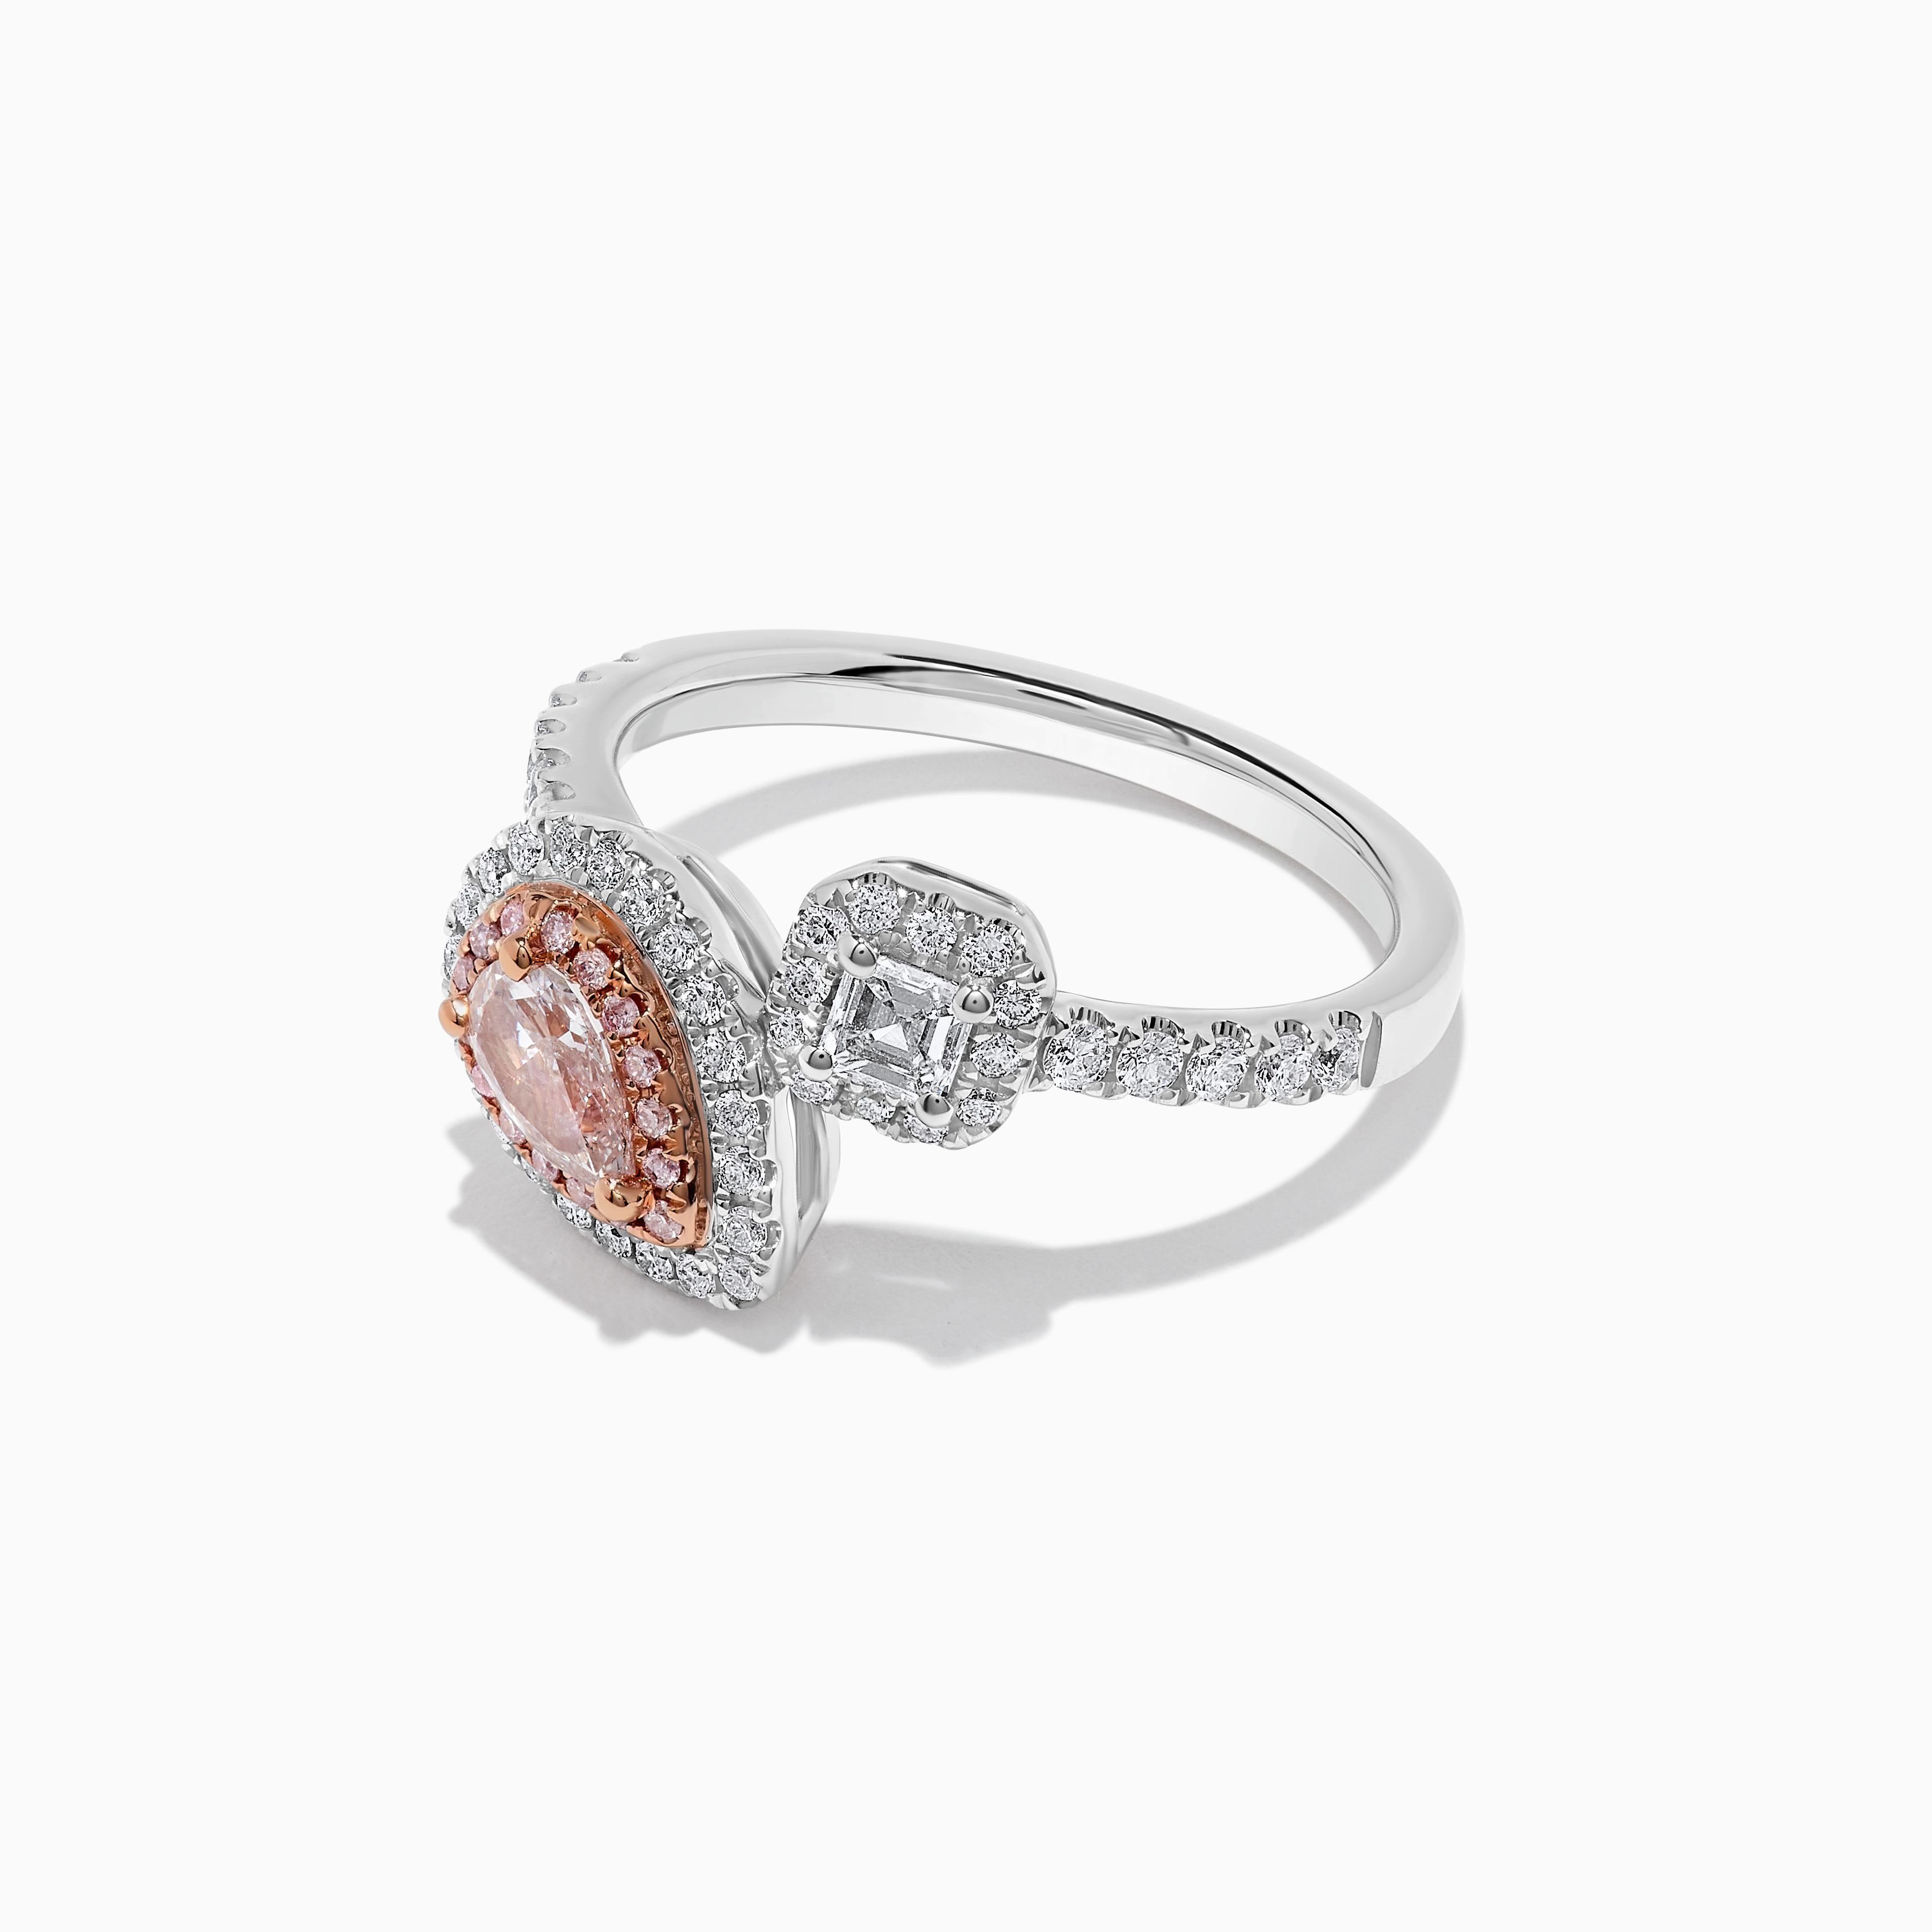 RareGemWorld's classic GIA certified diamond ring. Mounted in a beautiful 18K Rose and White Gold setting with a natural pear cut pink diamond. The pink diamond is surrounded by a natural emerald cut white diamond, round natural pink diamond melee,